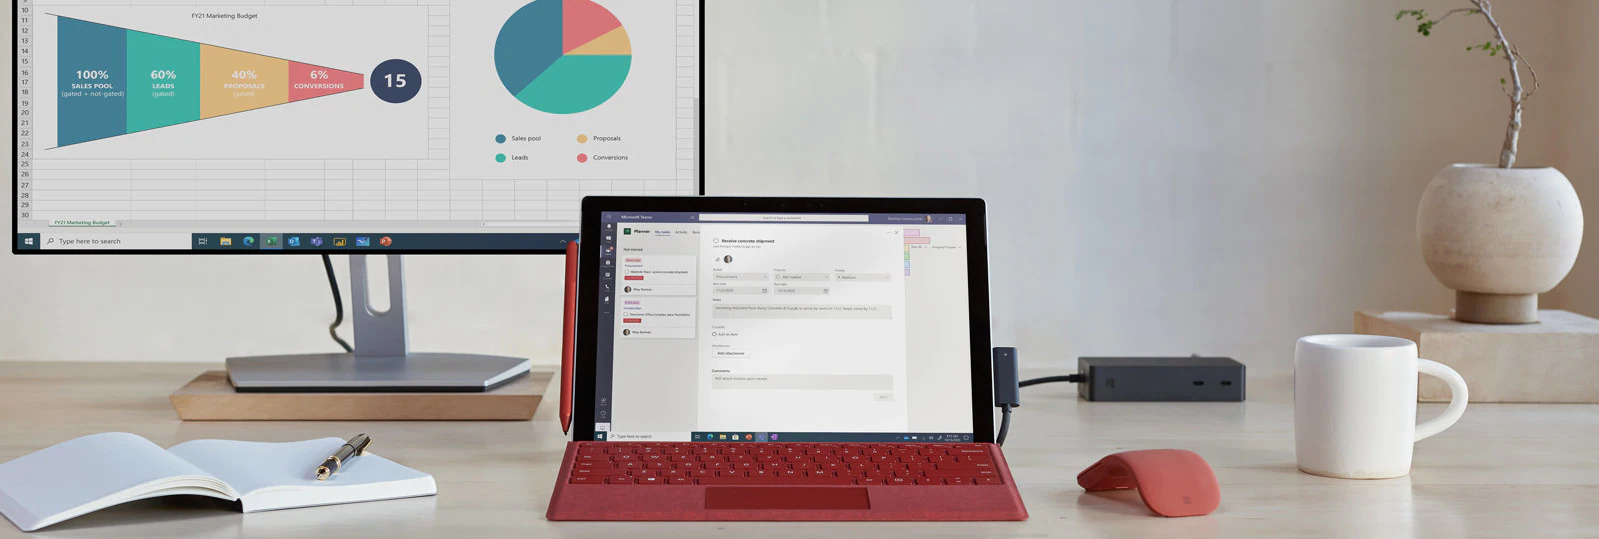 Surface Pro 7+ is shown on a home office desk with an external monitor and accessories